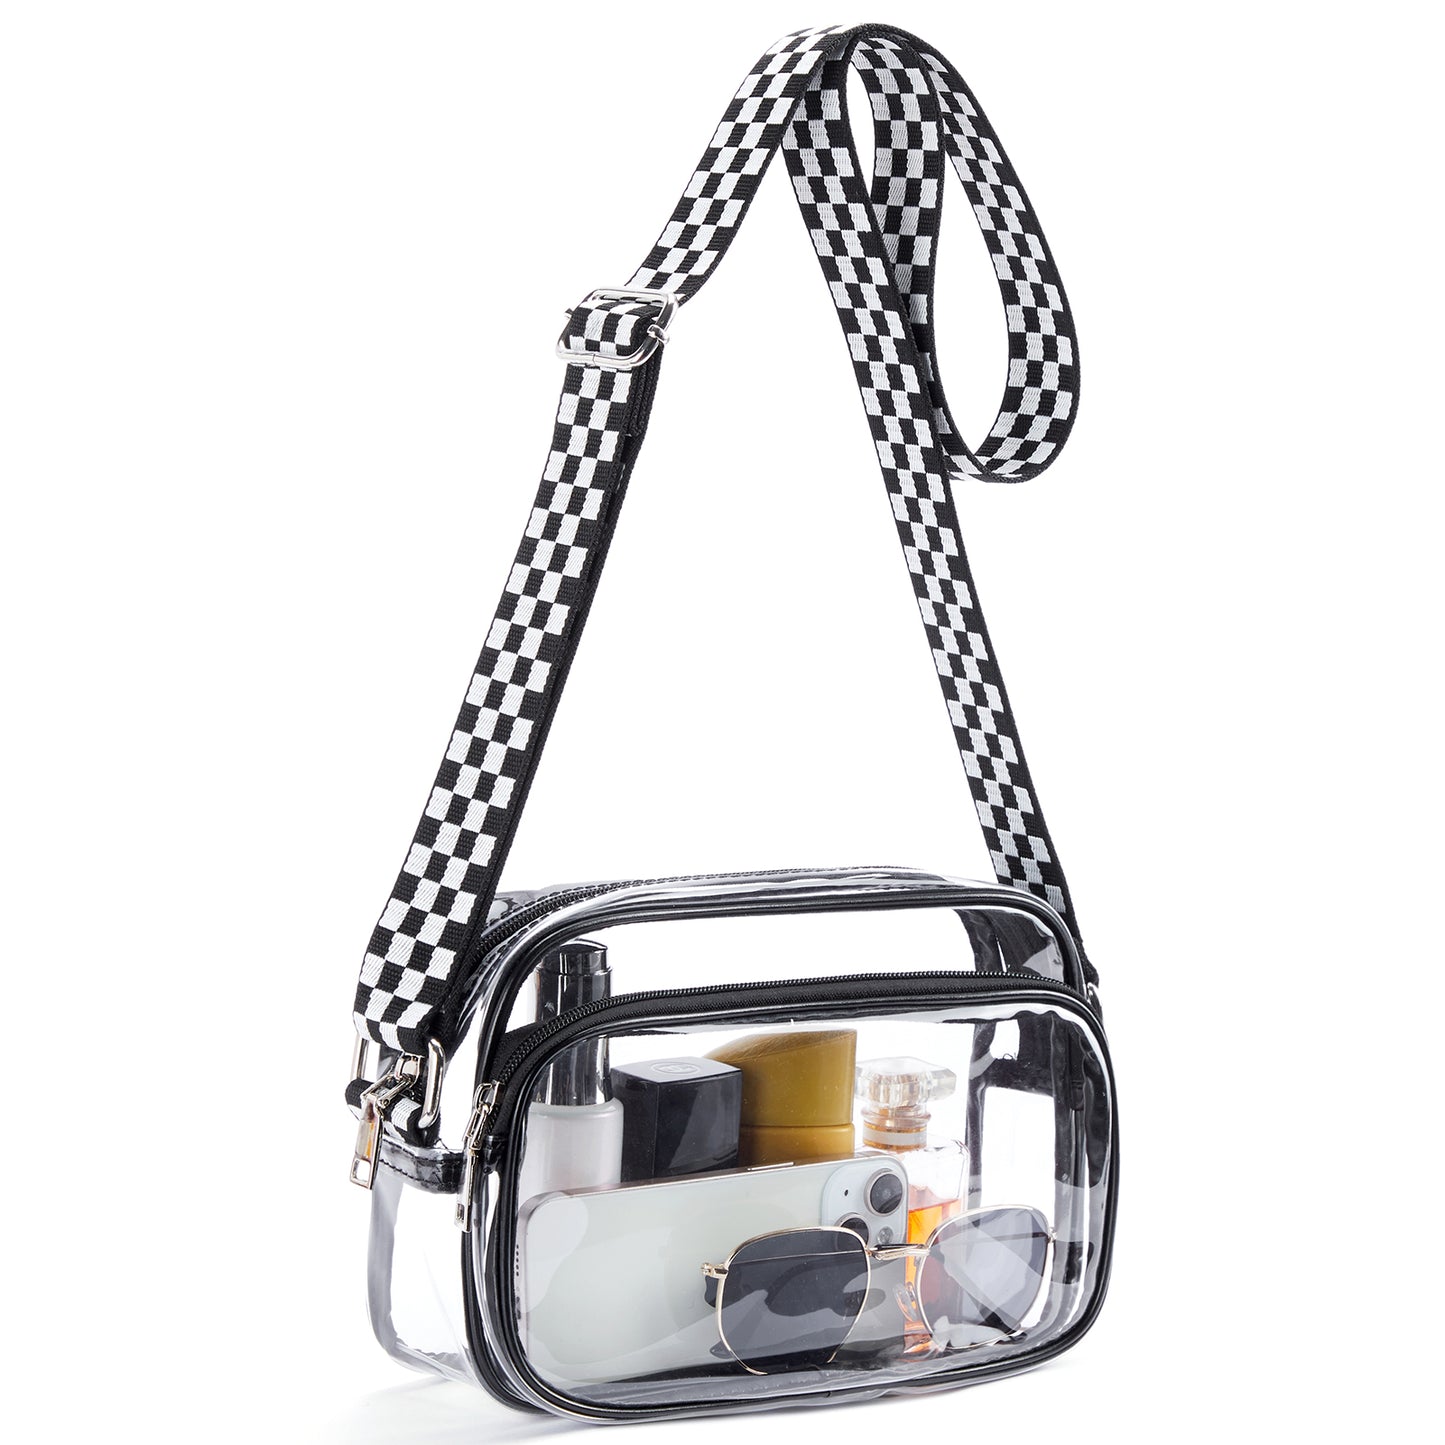 BOSTANTEN Clear Crossbody Purse for Women Triple Zip Cell Phone Handbag with Colored Shoulder Strap